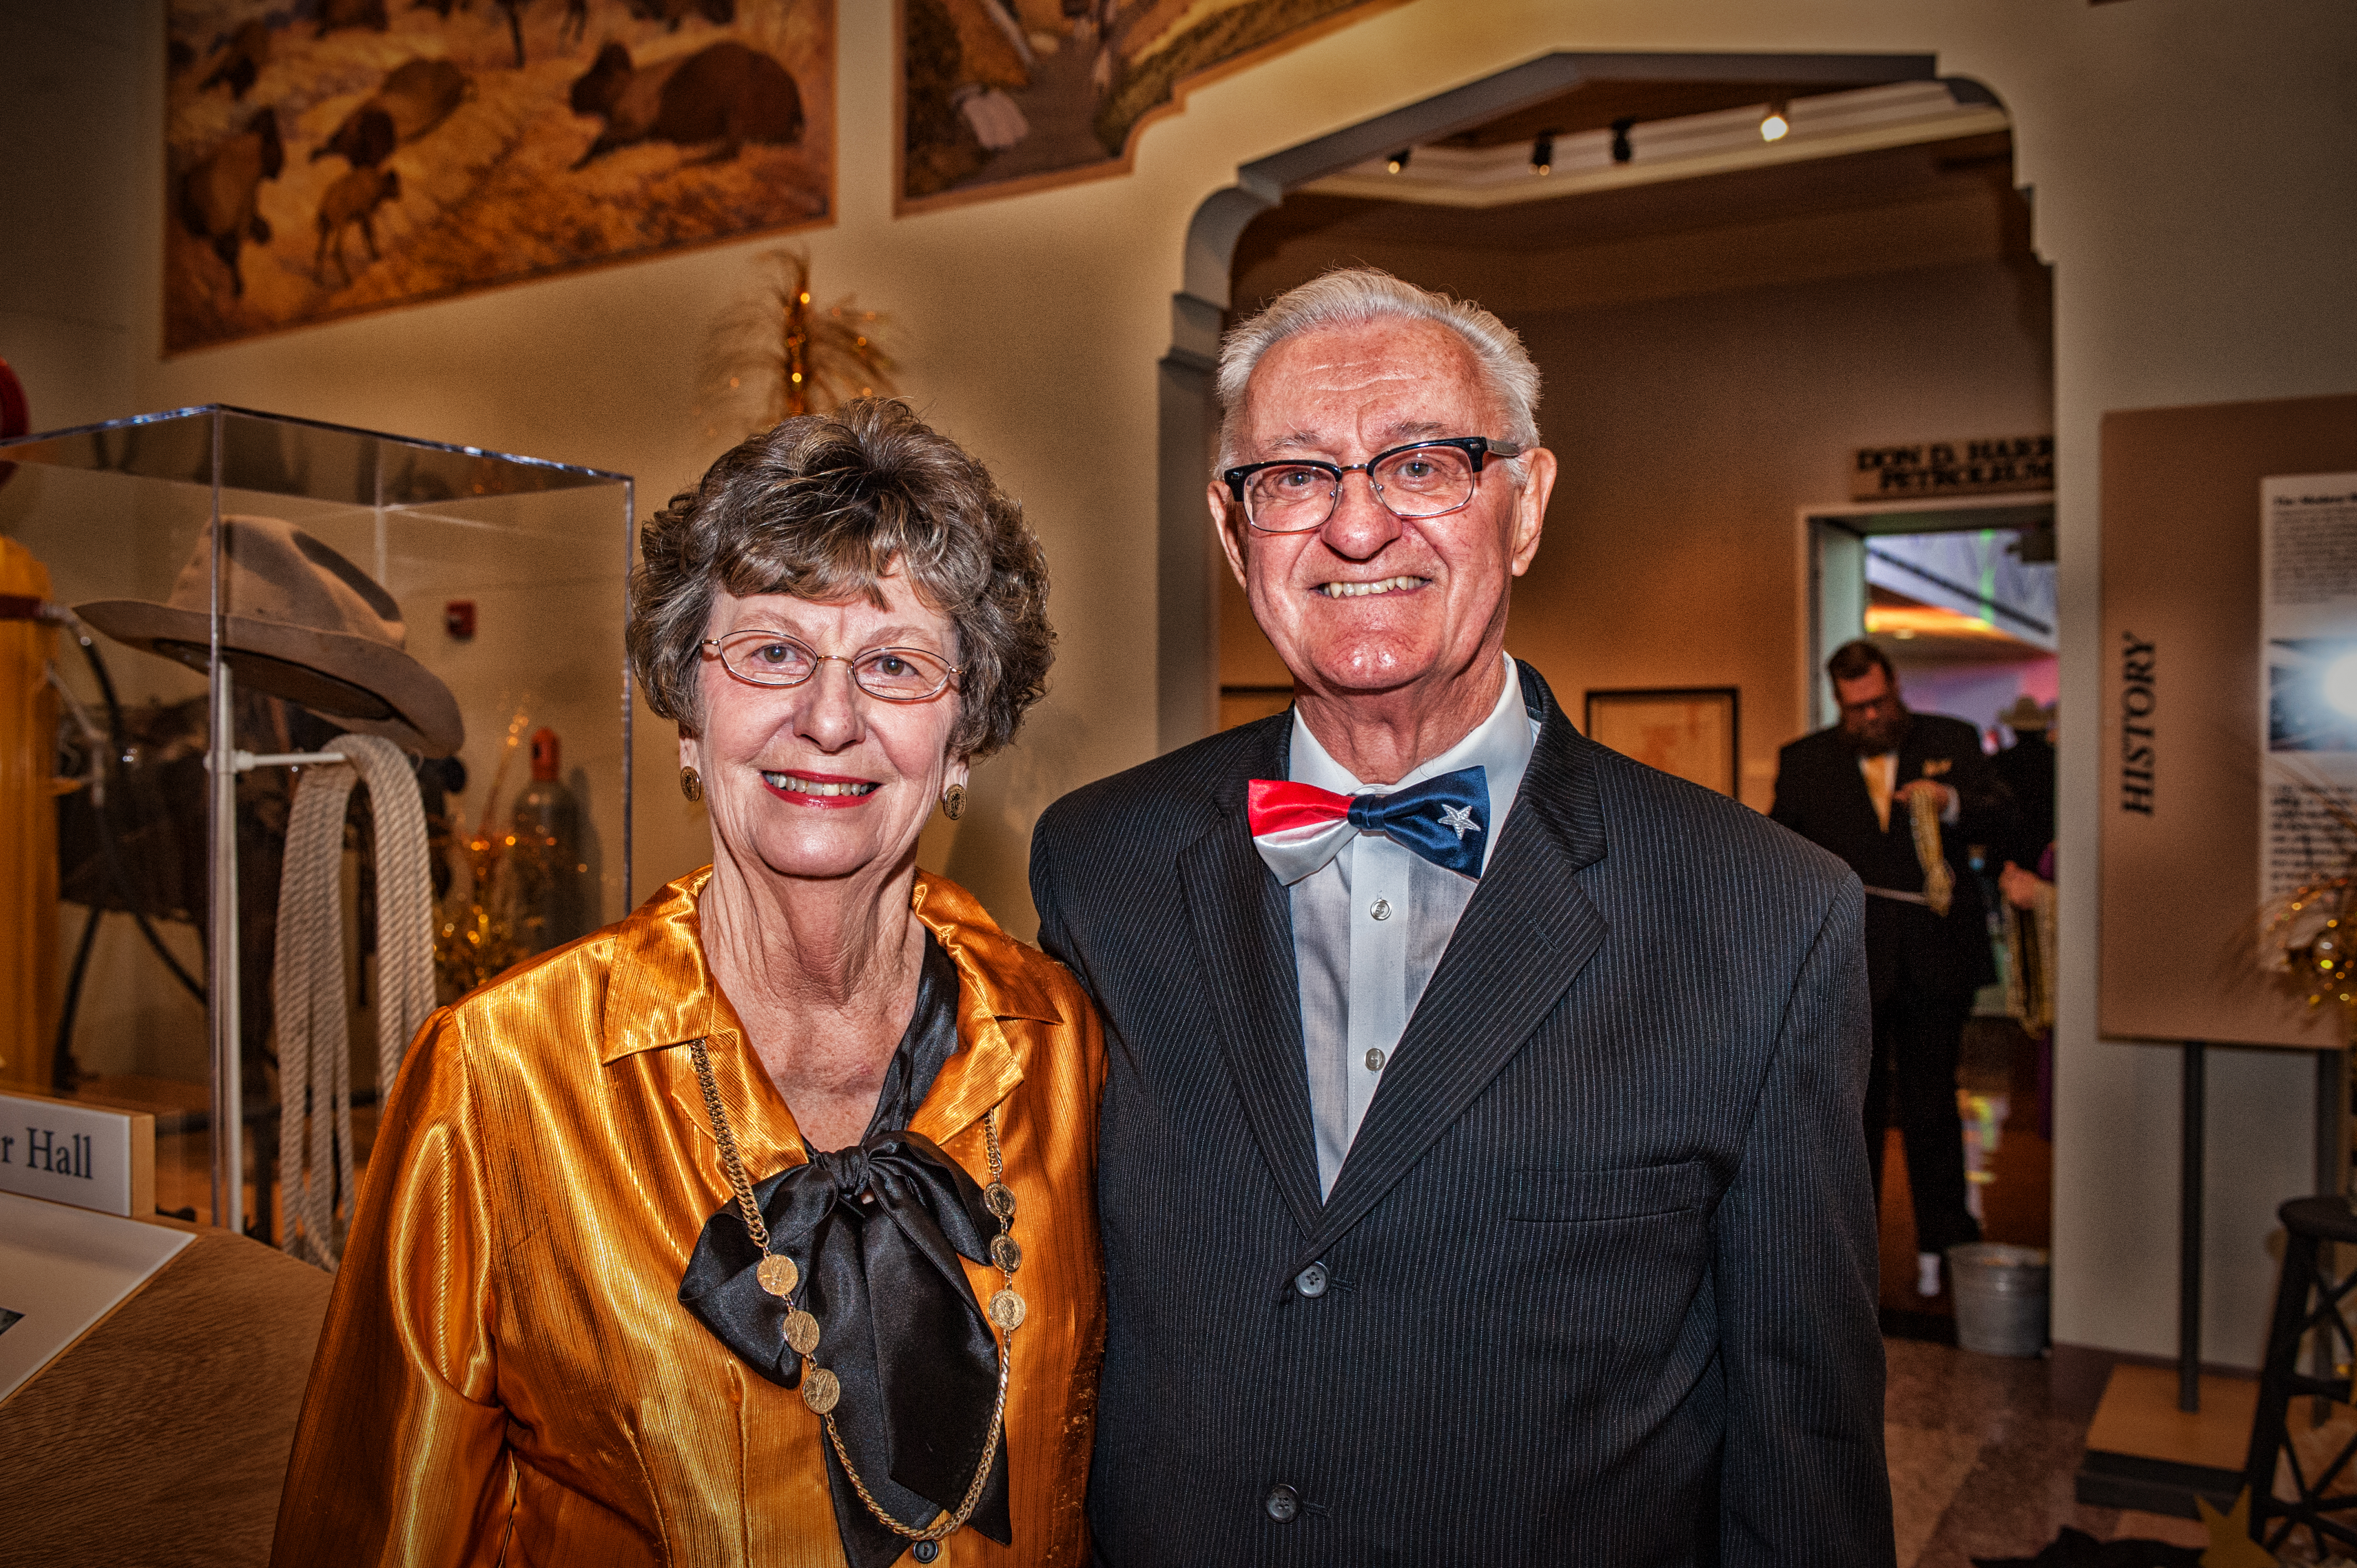 Shaie Williams for AGN Media. Diana Cox with Winston Stahlecker at the Black Gold  Ball 2016 held at the Panhandle Plains Historical Museum  in Canyon, TX. on April 16, 2016.